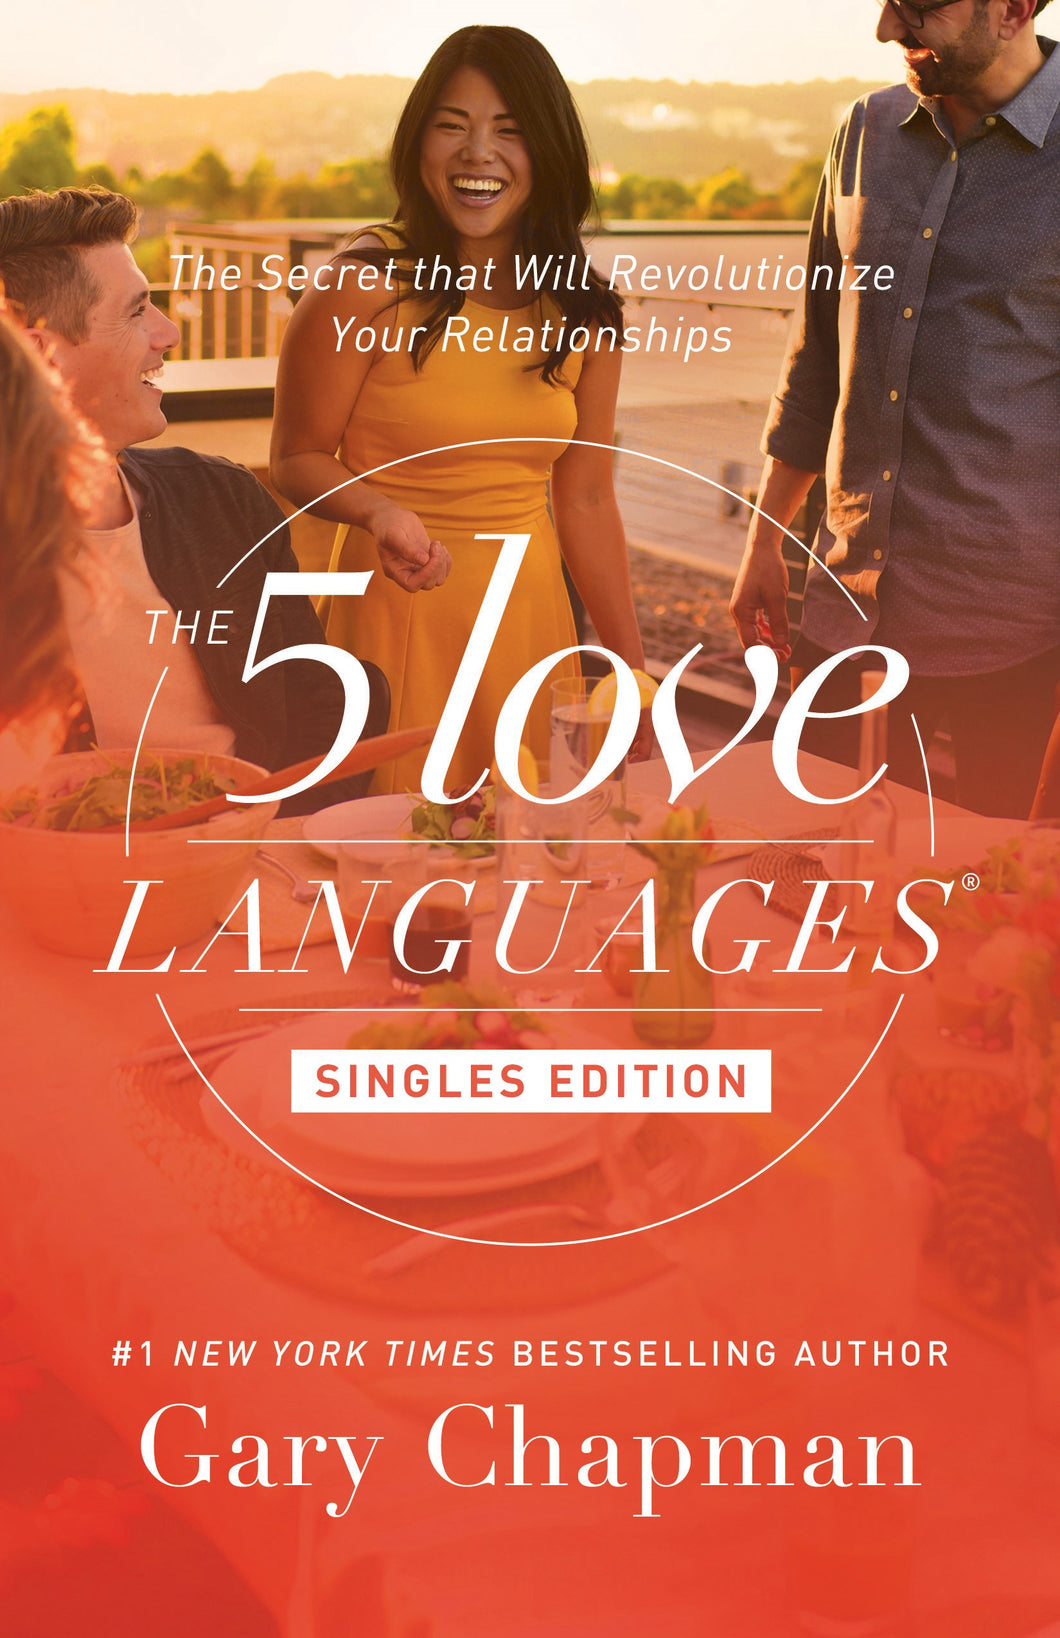 The 5 Love Languages (Singles Edition)